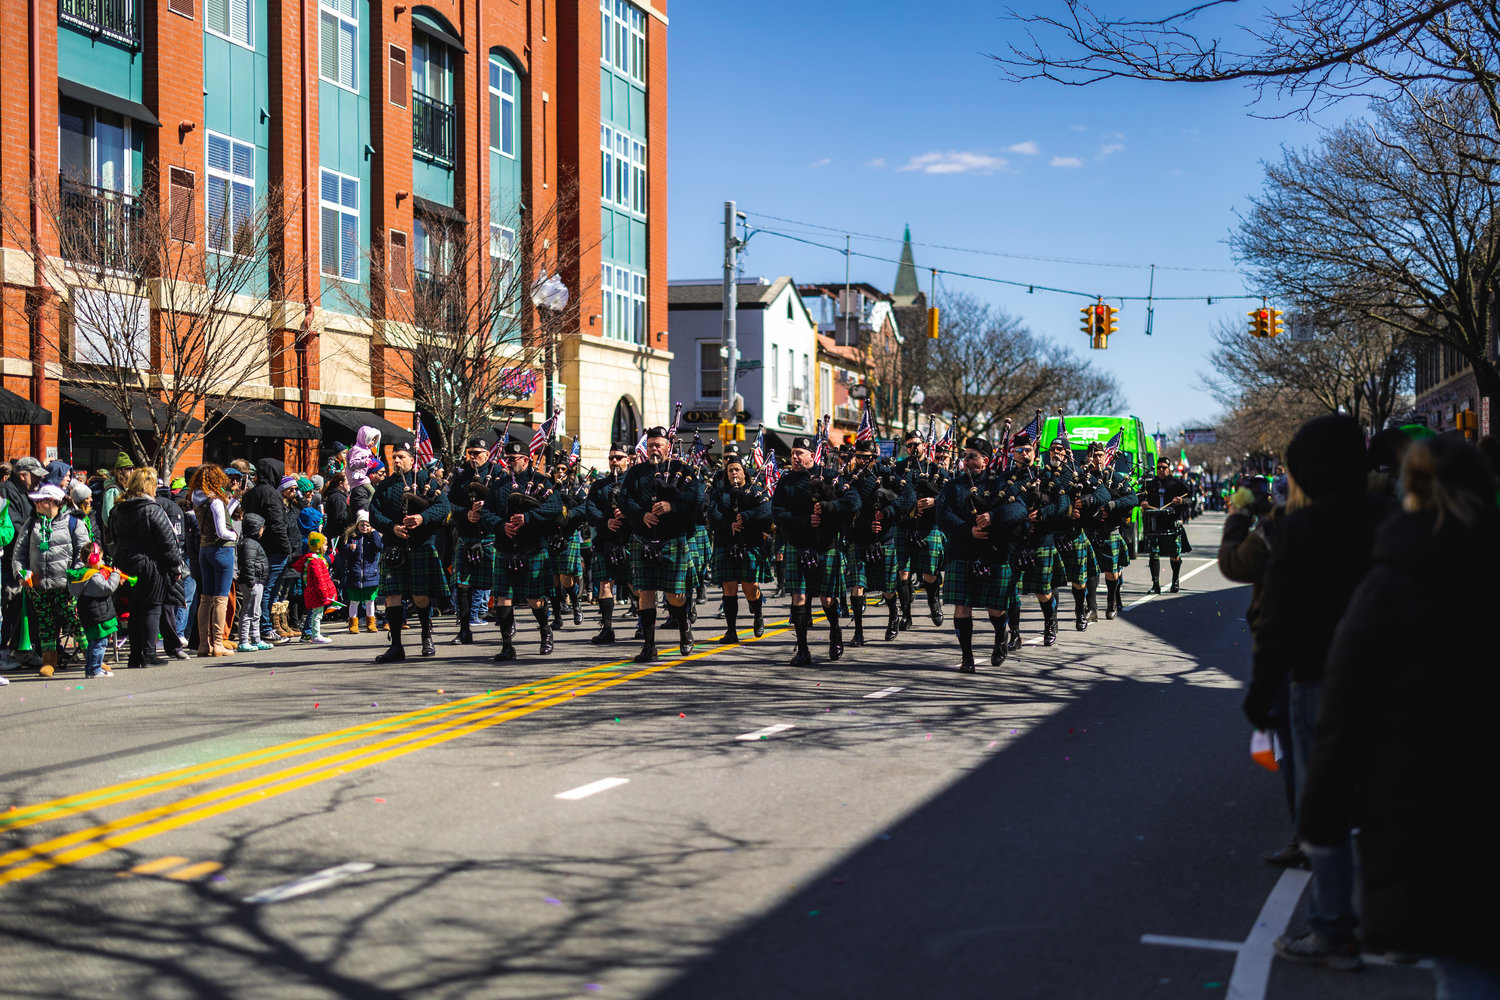 A view from the St. Patrick’s Day parade.